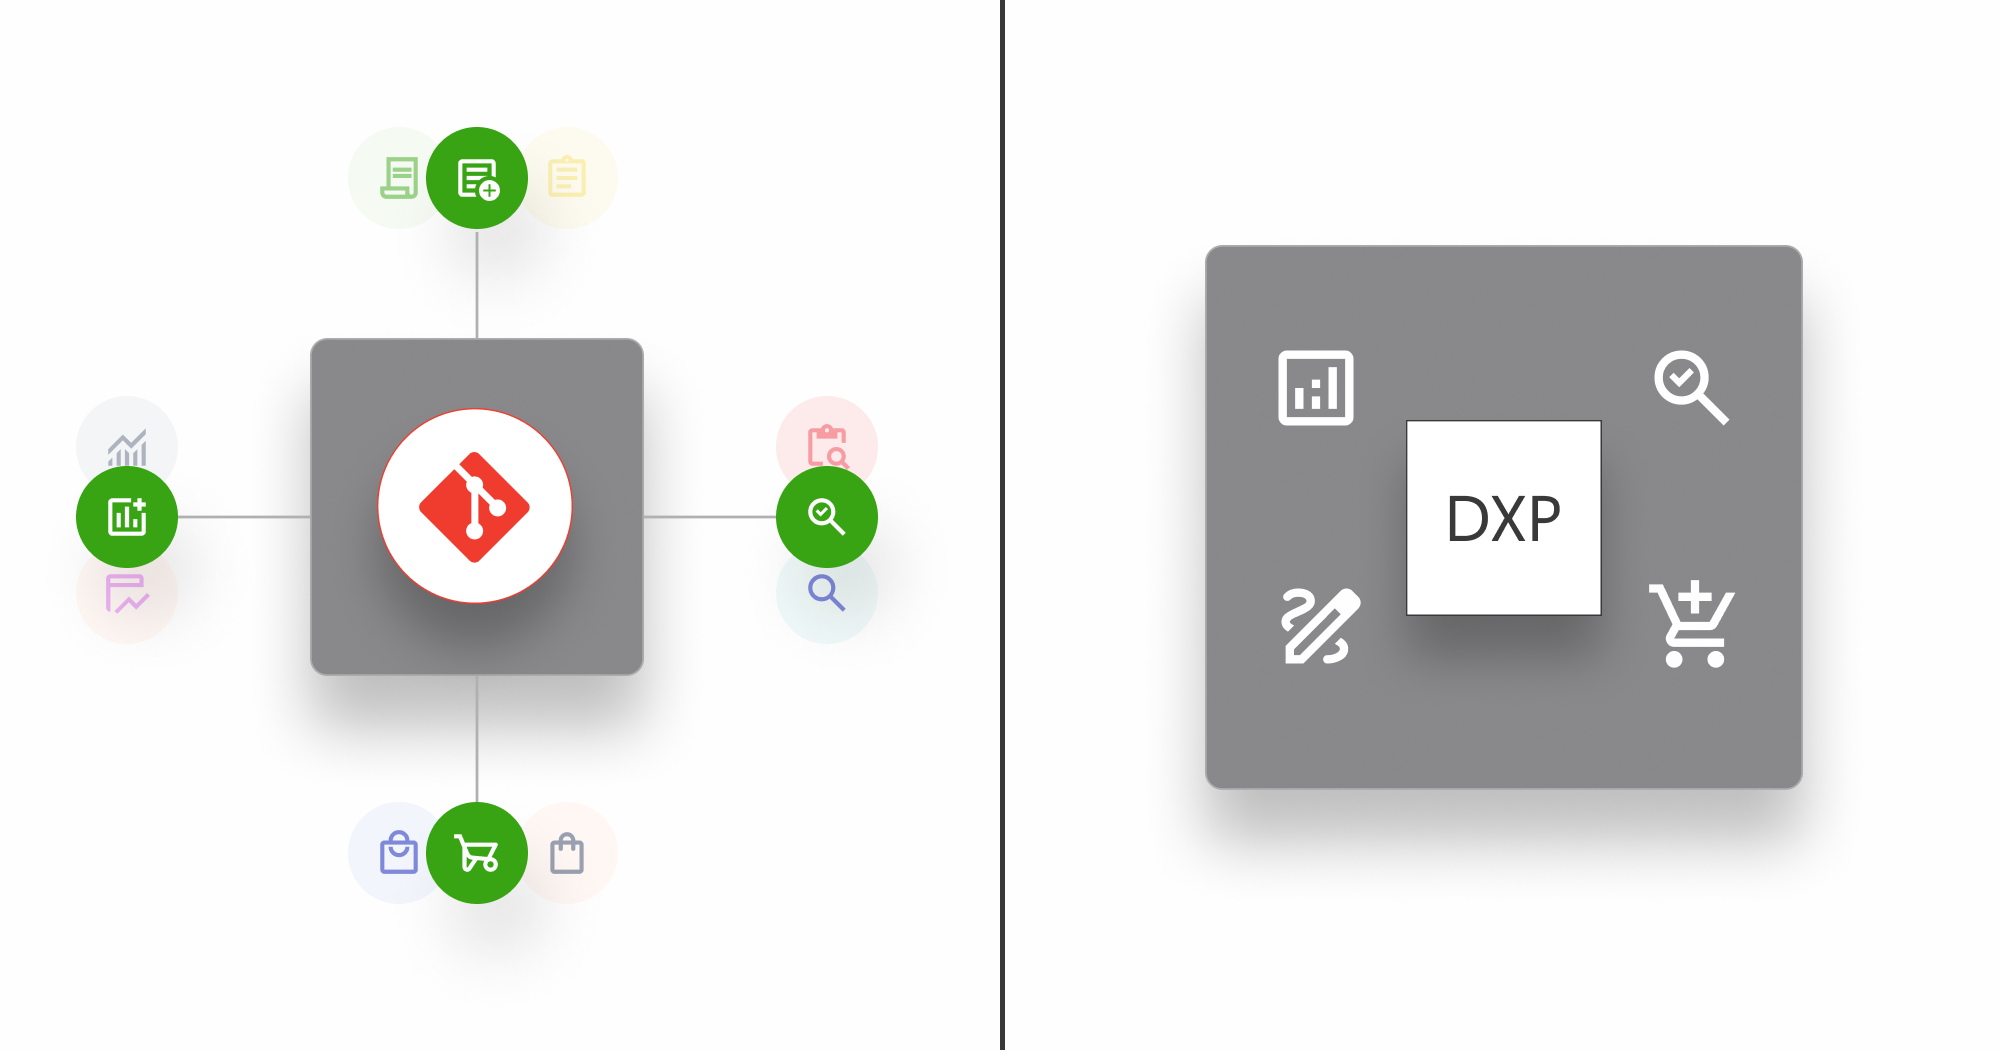 Diagram showing the differences between a Git CMS and monolithic DXP